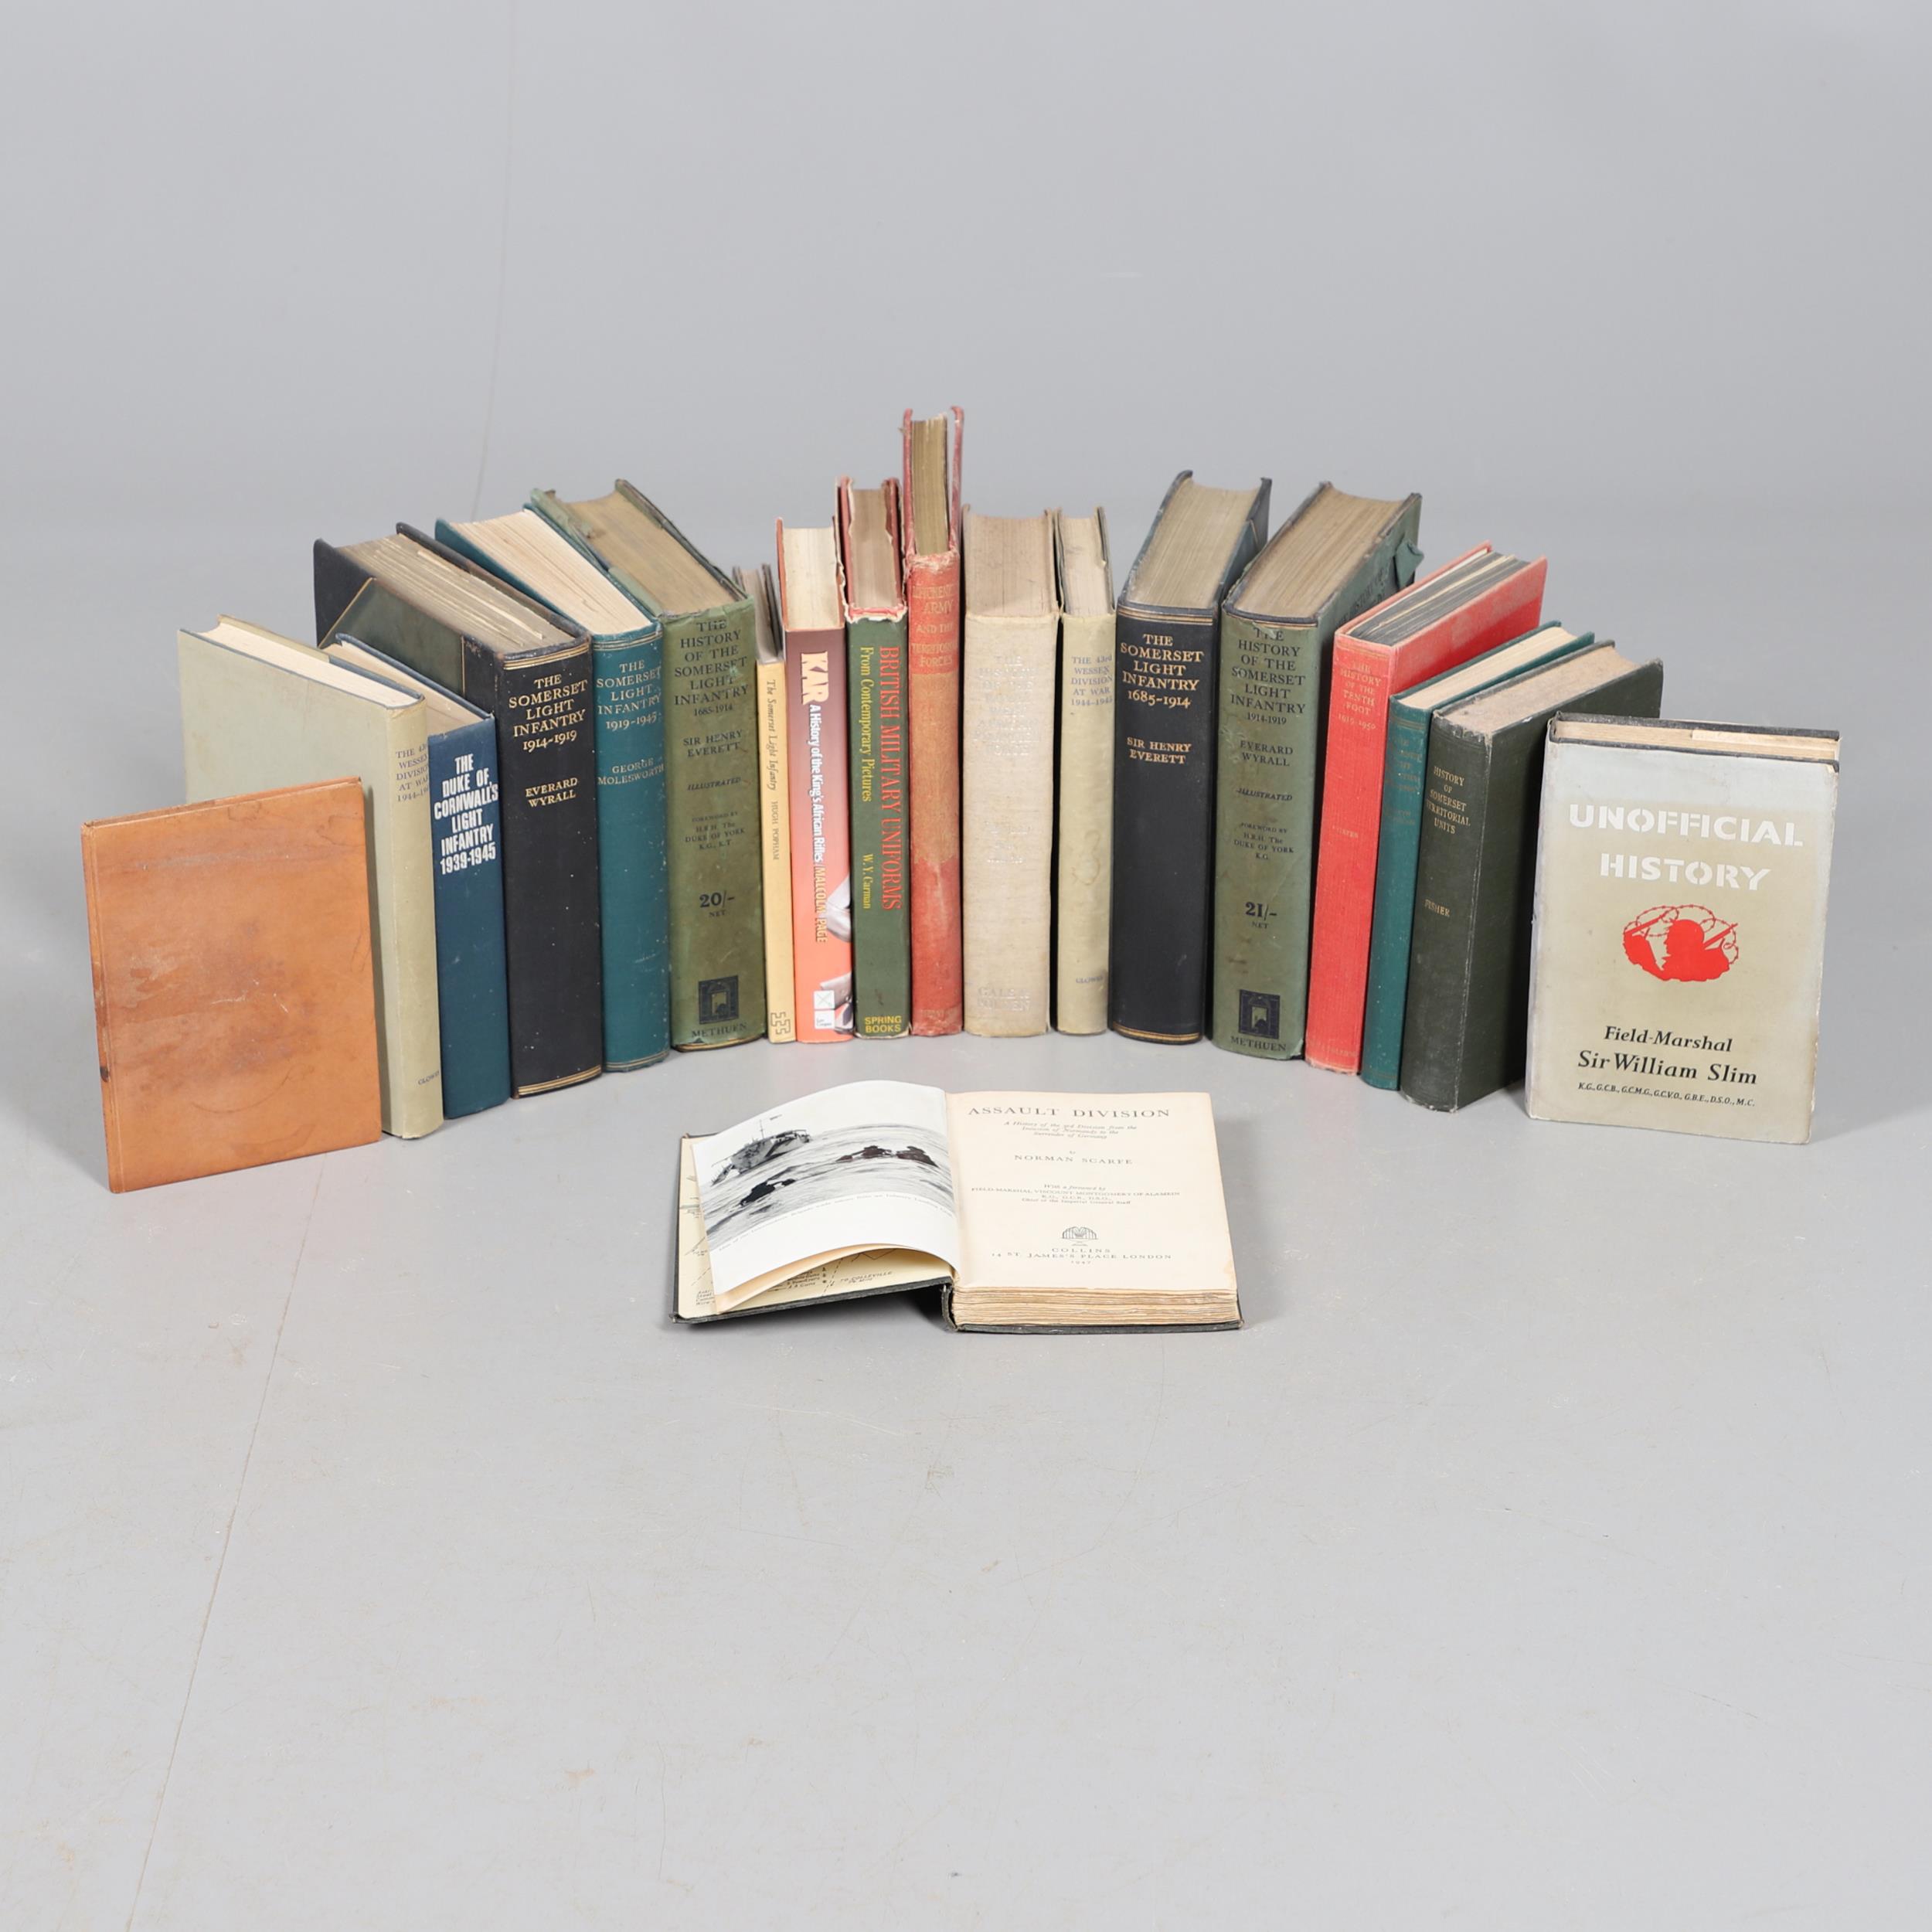 A QUANTITY OF VOLUMES RELATING TO THE SOMERSET LIGHT INFANTRY AND OTHER MILITARY HISTORY.